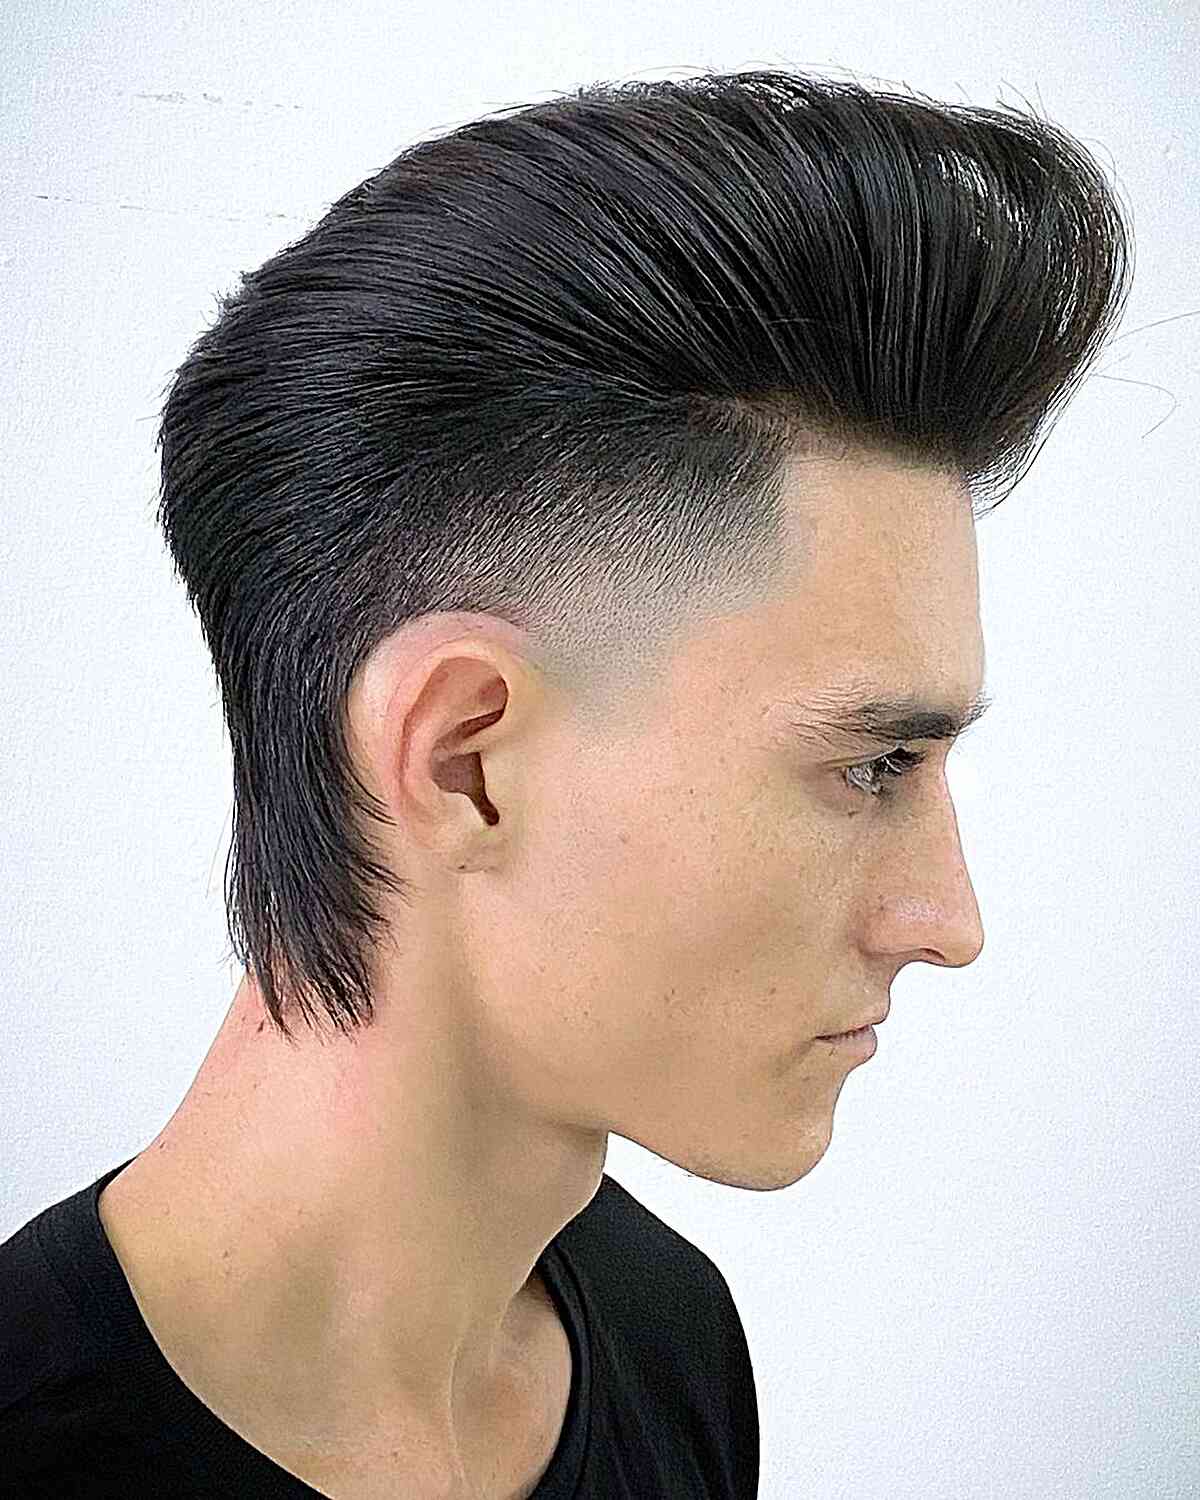 The 50 Coolest Pompadour Haircuts for Men Blowin' Up Right Now